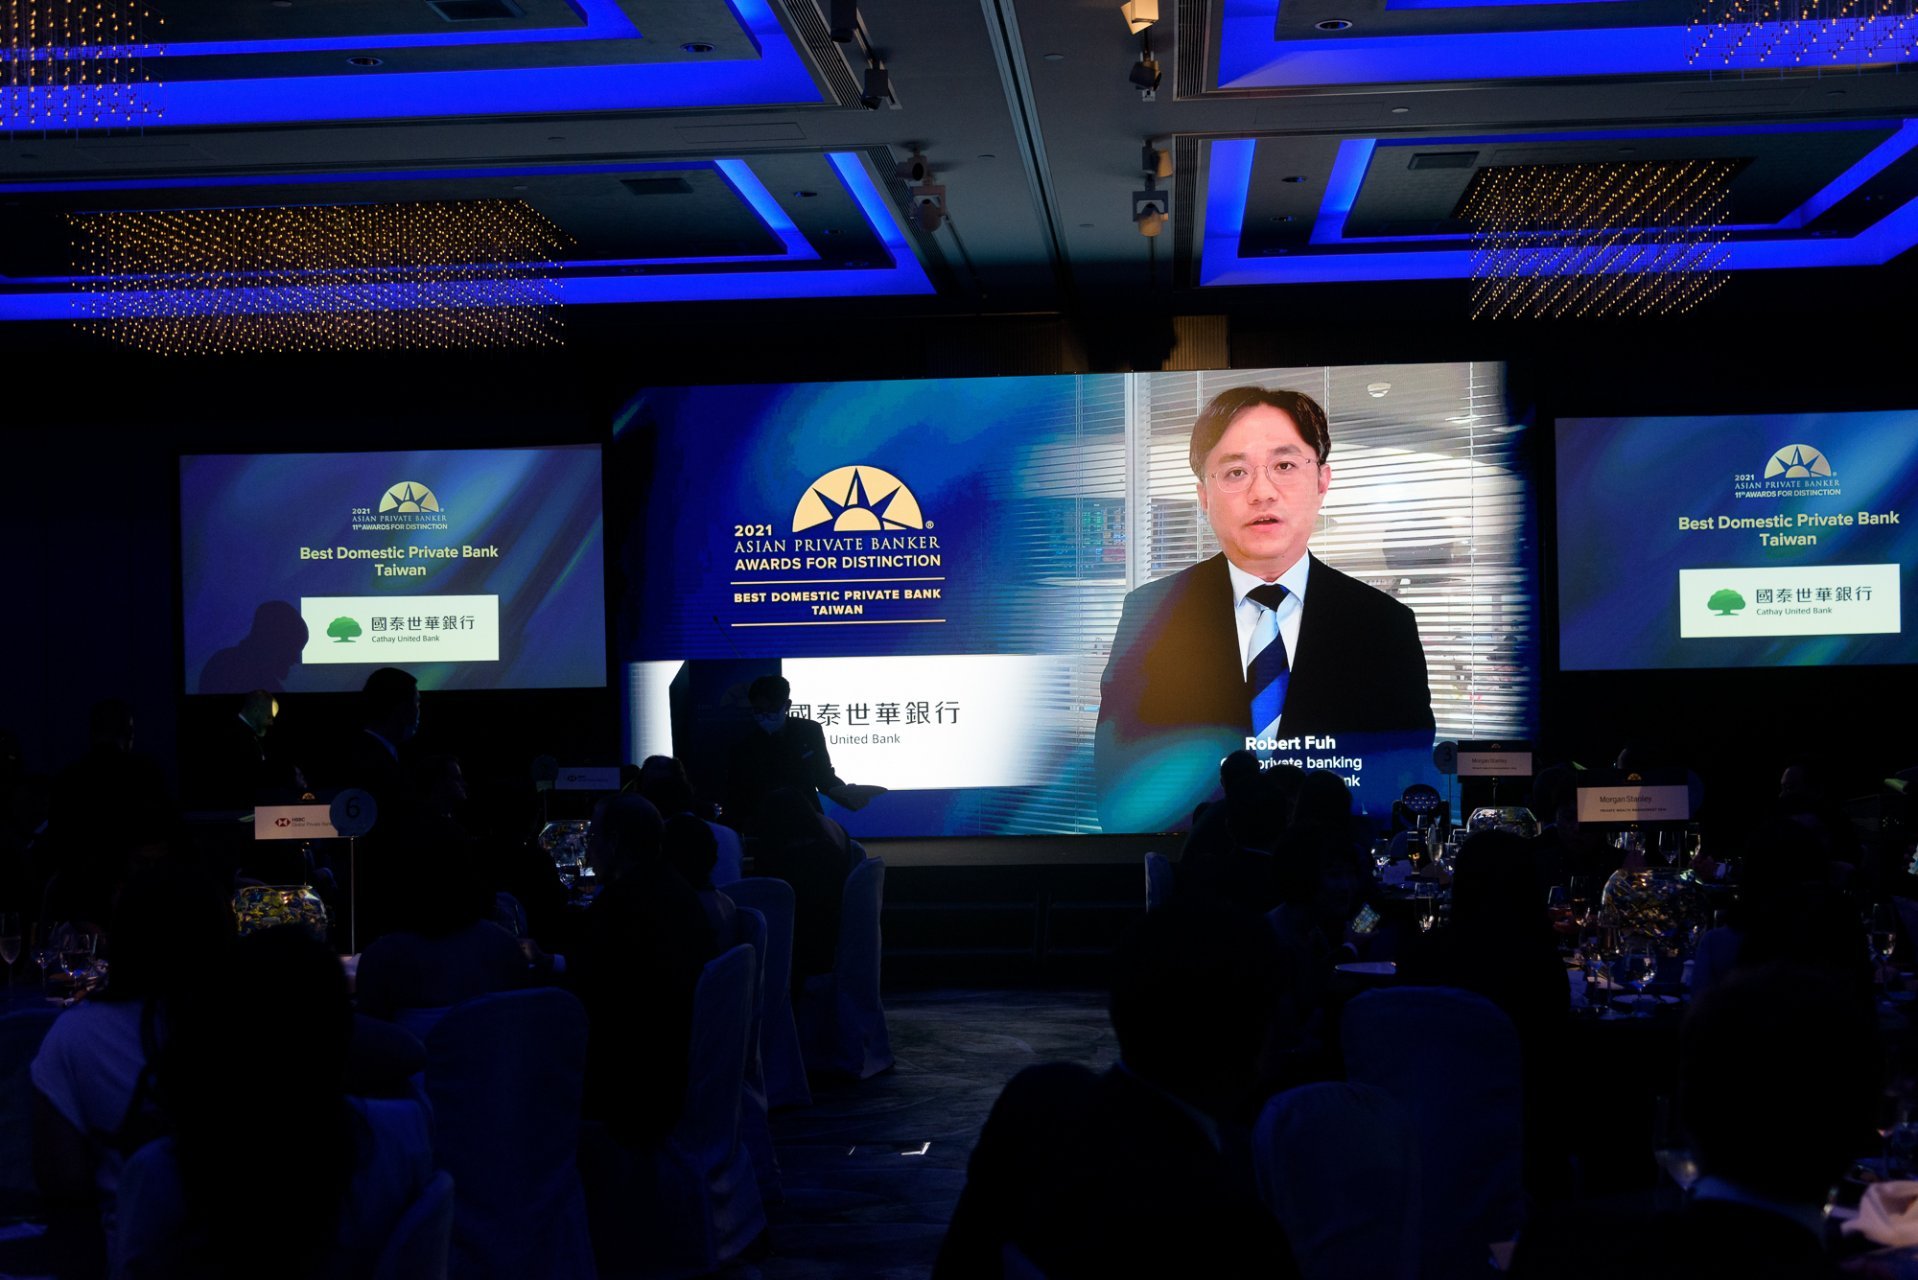 Robert Fuh of Cathay United Bank on winning Best Domestic Private Bank – Taiwan for the third year in a row